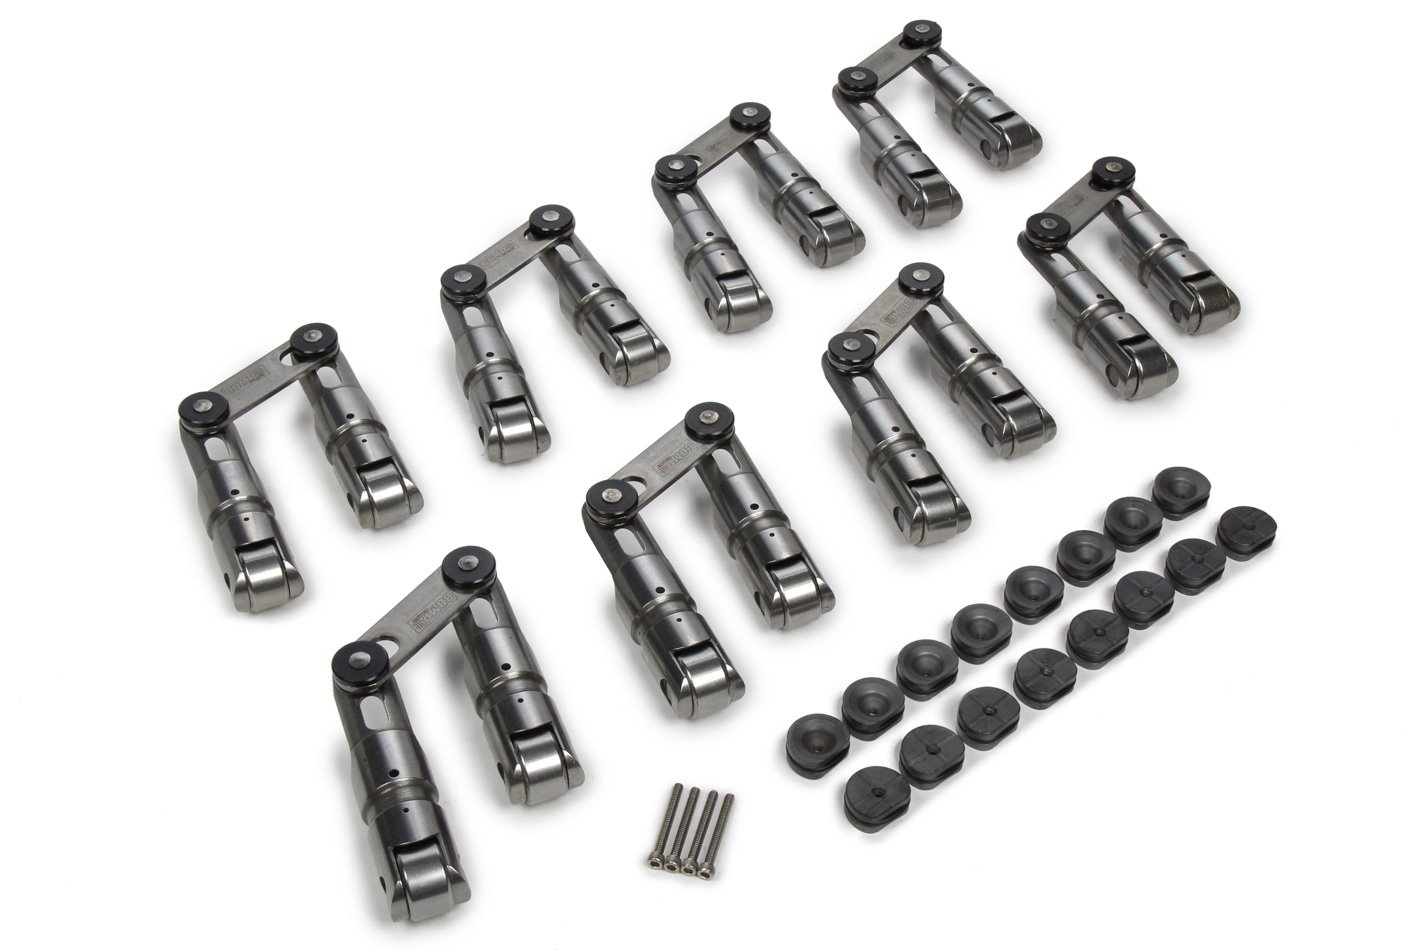 COMP CAMS Lifter, Race XD, Mechanical Roller, 0.842" OD, Link Bar, Small Block Chevy, Set of 16